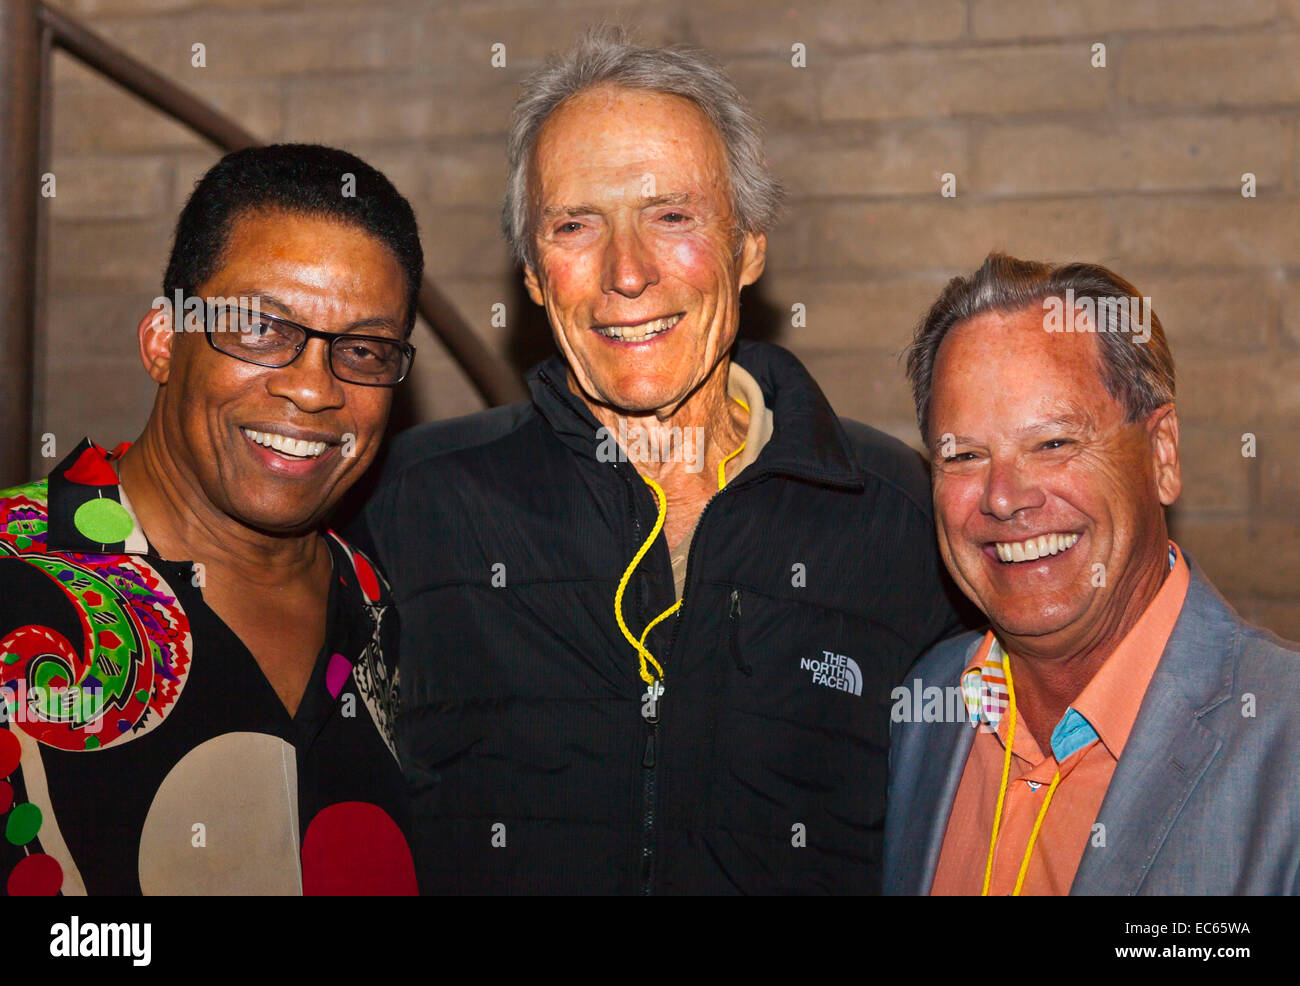 HERBIE HANCOCK backstage with CLINT EASTWOOD and TIM JACKSON at the MONTEREY JAZZ FESTIVAL Stock Photo